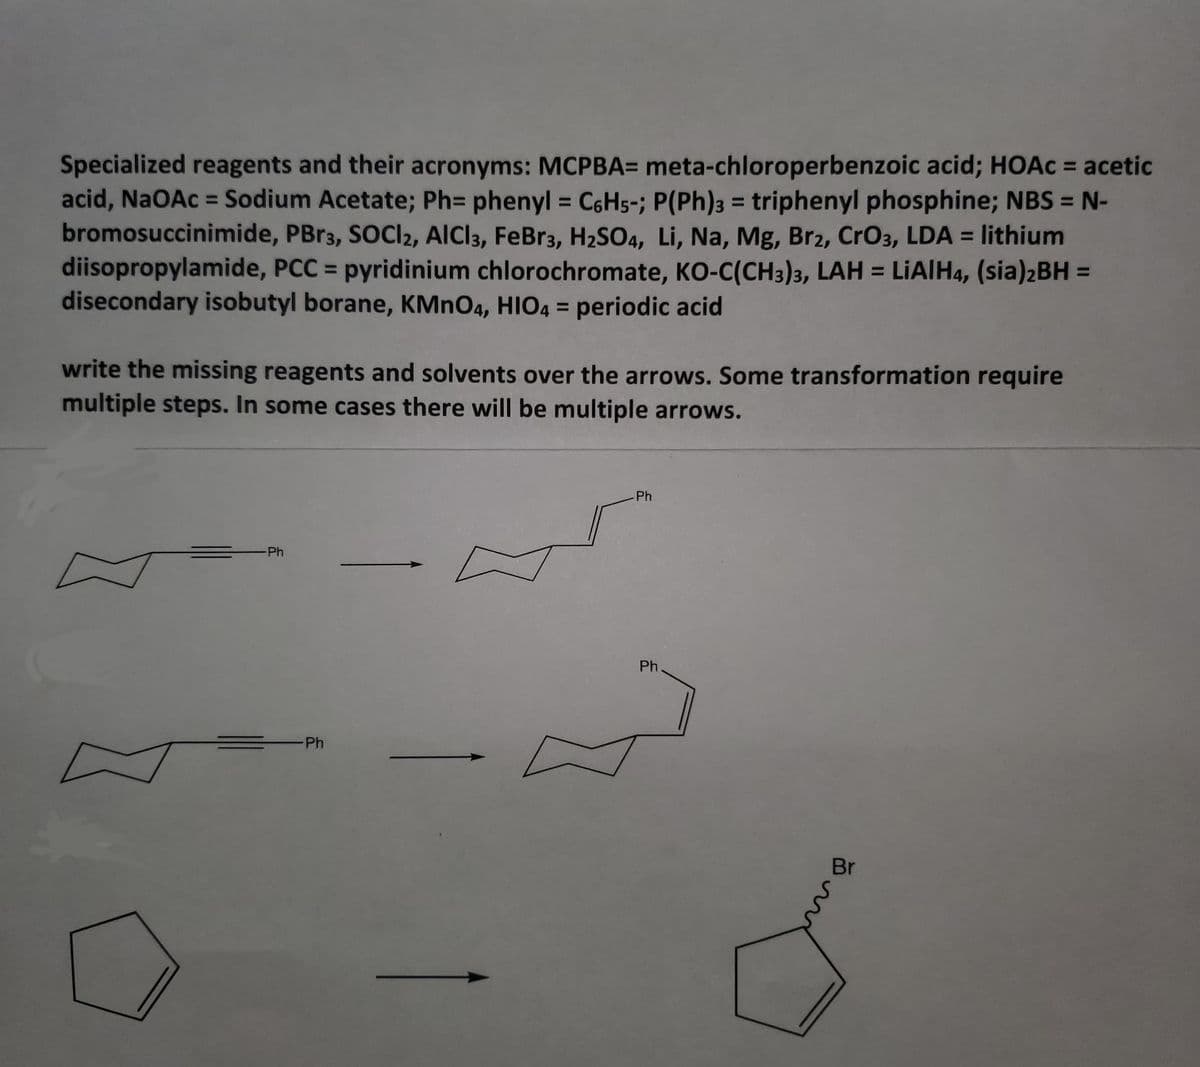 Specialized reagents and their acronyms: MCPBA= meta-chloroperbenzoic acid; HOAC = acetic
acid, NaOAc = Sodium Acetate; Ph= phenyl = C6H5-; P(Ph)3 = triphenyl phosphine; NBS = N-
bromosuccinimide, PBR3, SOCI2, AICI3, FeBr3, H2SO4, Li, Na, Mg, Br2, CrO3, LDA = lithium
diisopropylamide, PCC = pyridinium chlorochromate, KO-C(CH3)3, LAH = LIAIH4, (sia)2BH =
disecondary isobutyl borane, KMNO4, HIO4 = periodic acid
%3D
write the missing reagents and solvents over the arrows. Some transformation require
multiple steps. In some cases there will be multiple arrows.
Ph
-Ph
Ph
Ph
Br
